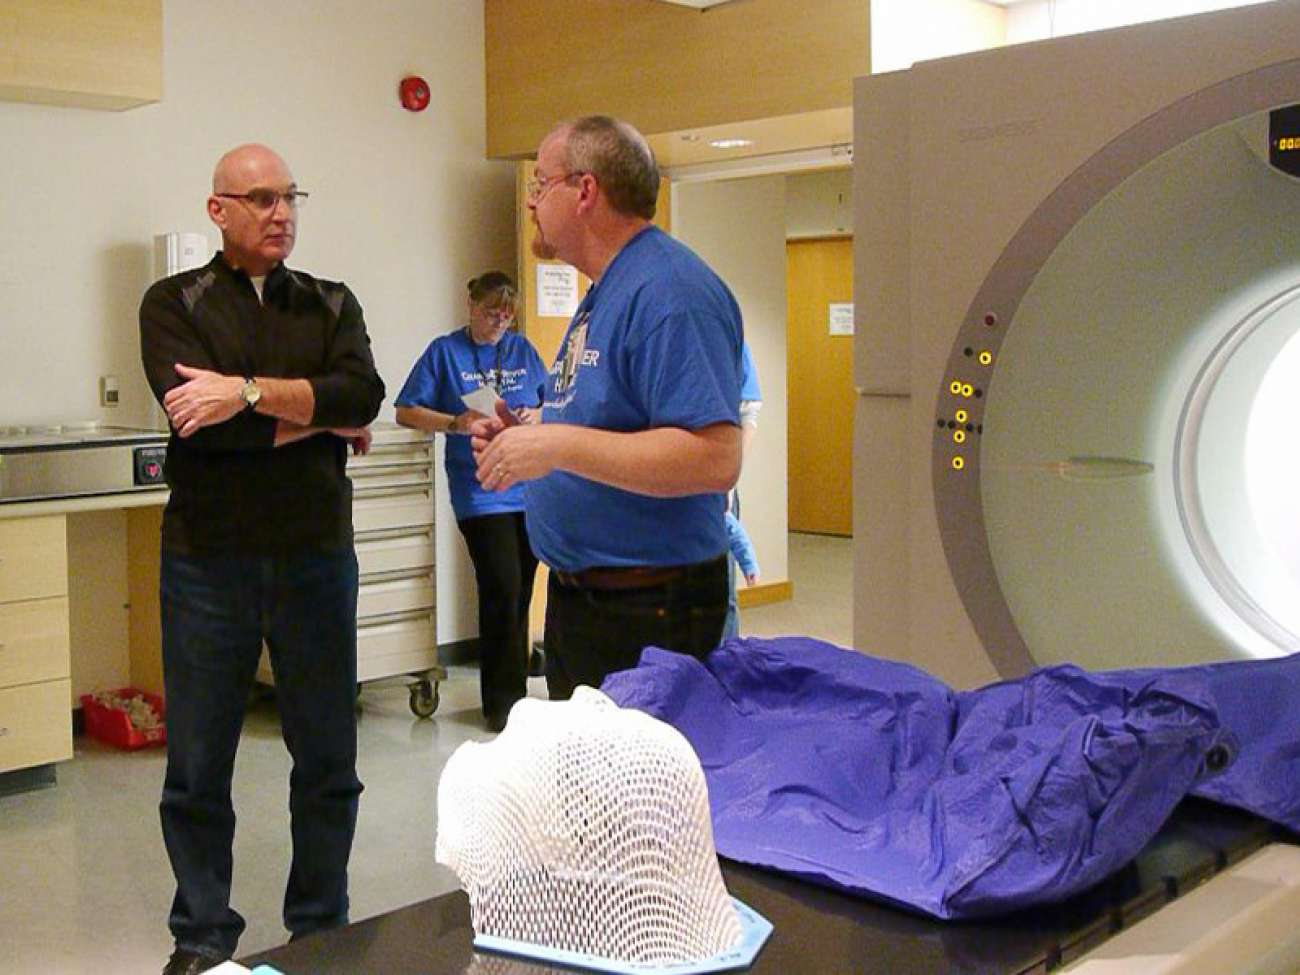 GRH currently has one CT simulator (shown) for radiation therapy planning.